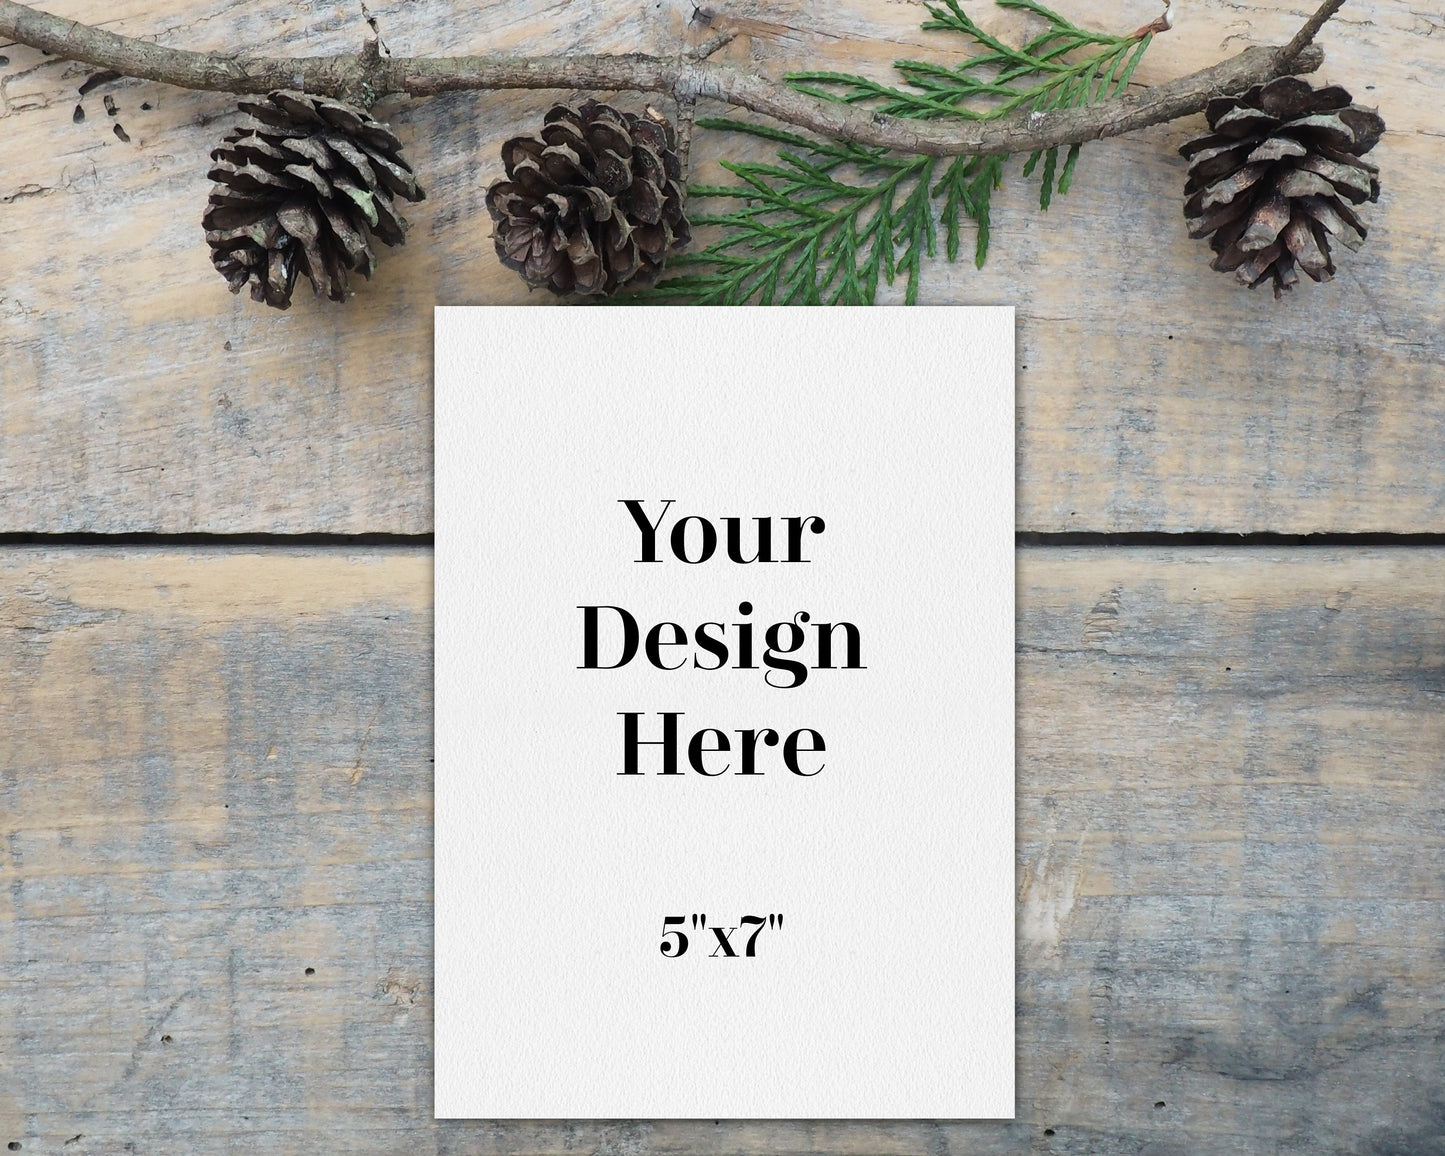 5"x7" Card Mockup , Vertical Christmas Card Mockup on Farmhouse Rustic Styled Wood, Instant Download Jpg Flat Lay